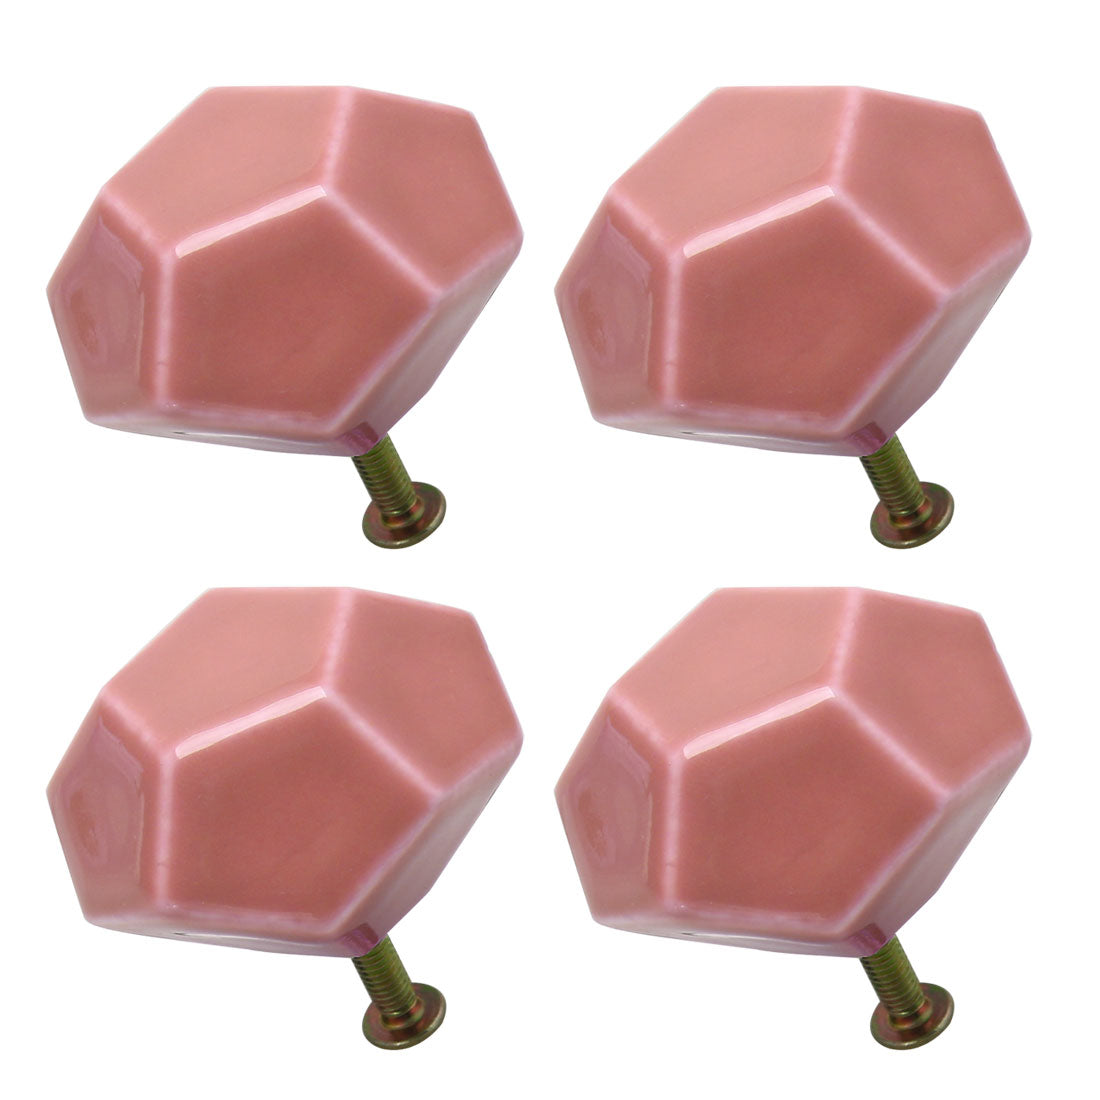 uxcell Uxcell Ceramic Vintage Knob Geometry Drawer Pull Handle Cupboard Wardrobe 4pcs Pink